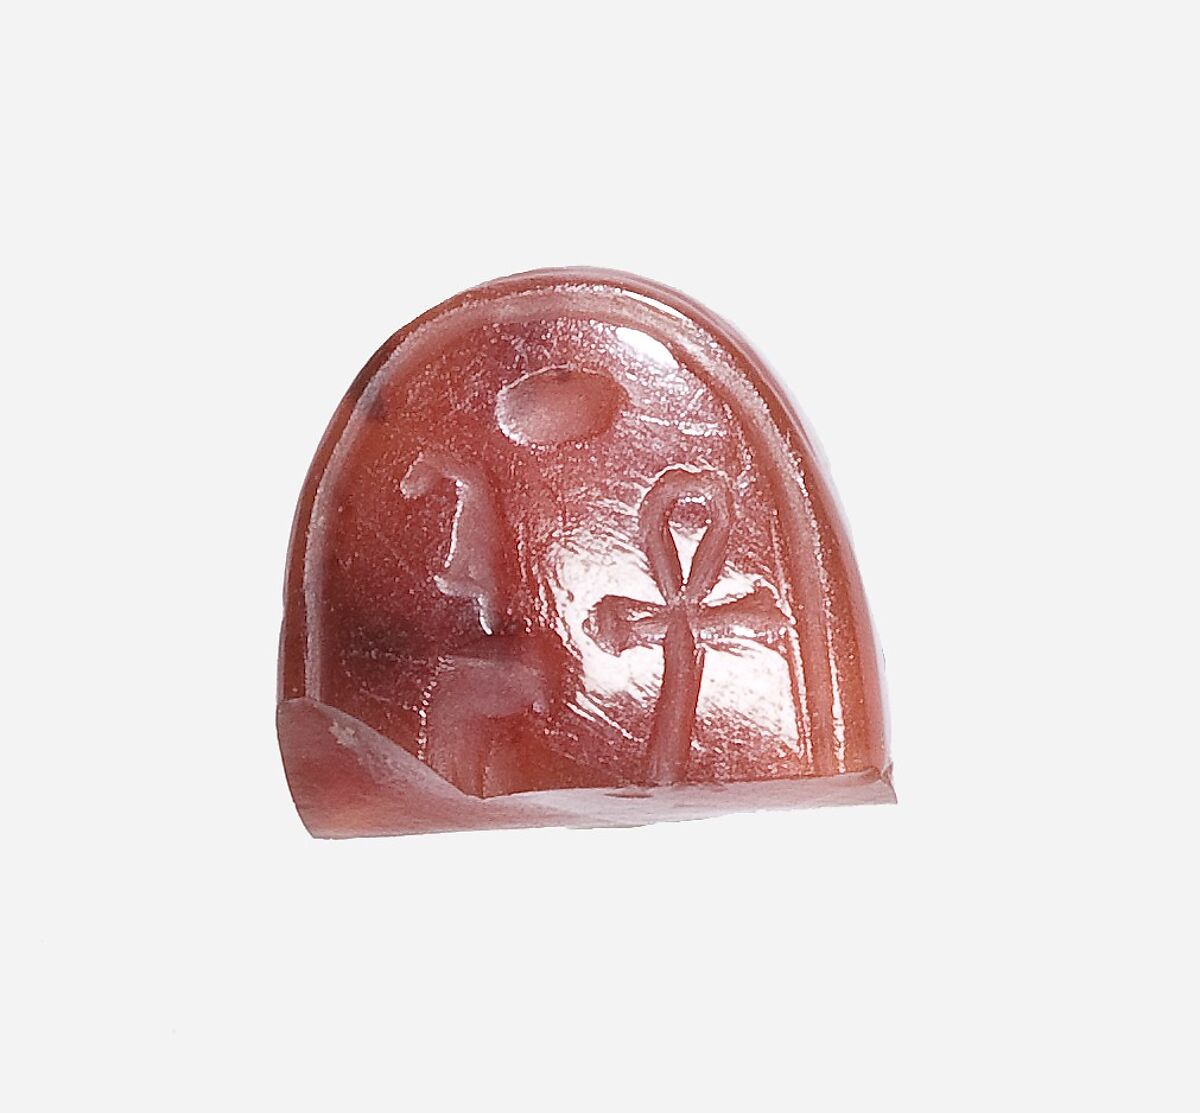 Ring Fragment with Cartouche of Amenhotep III, Carnelian 